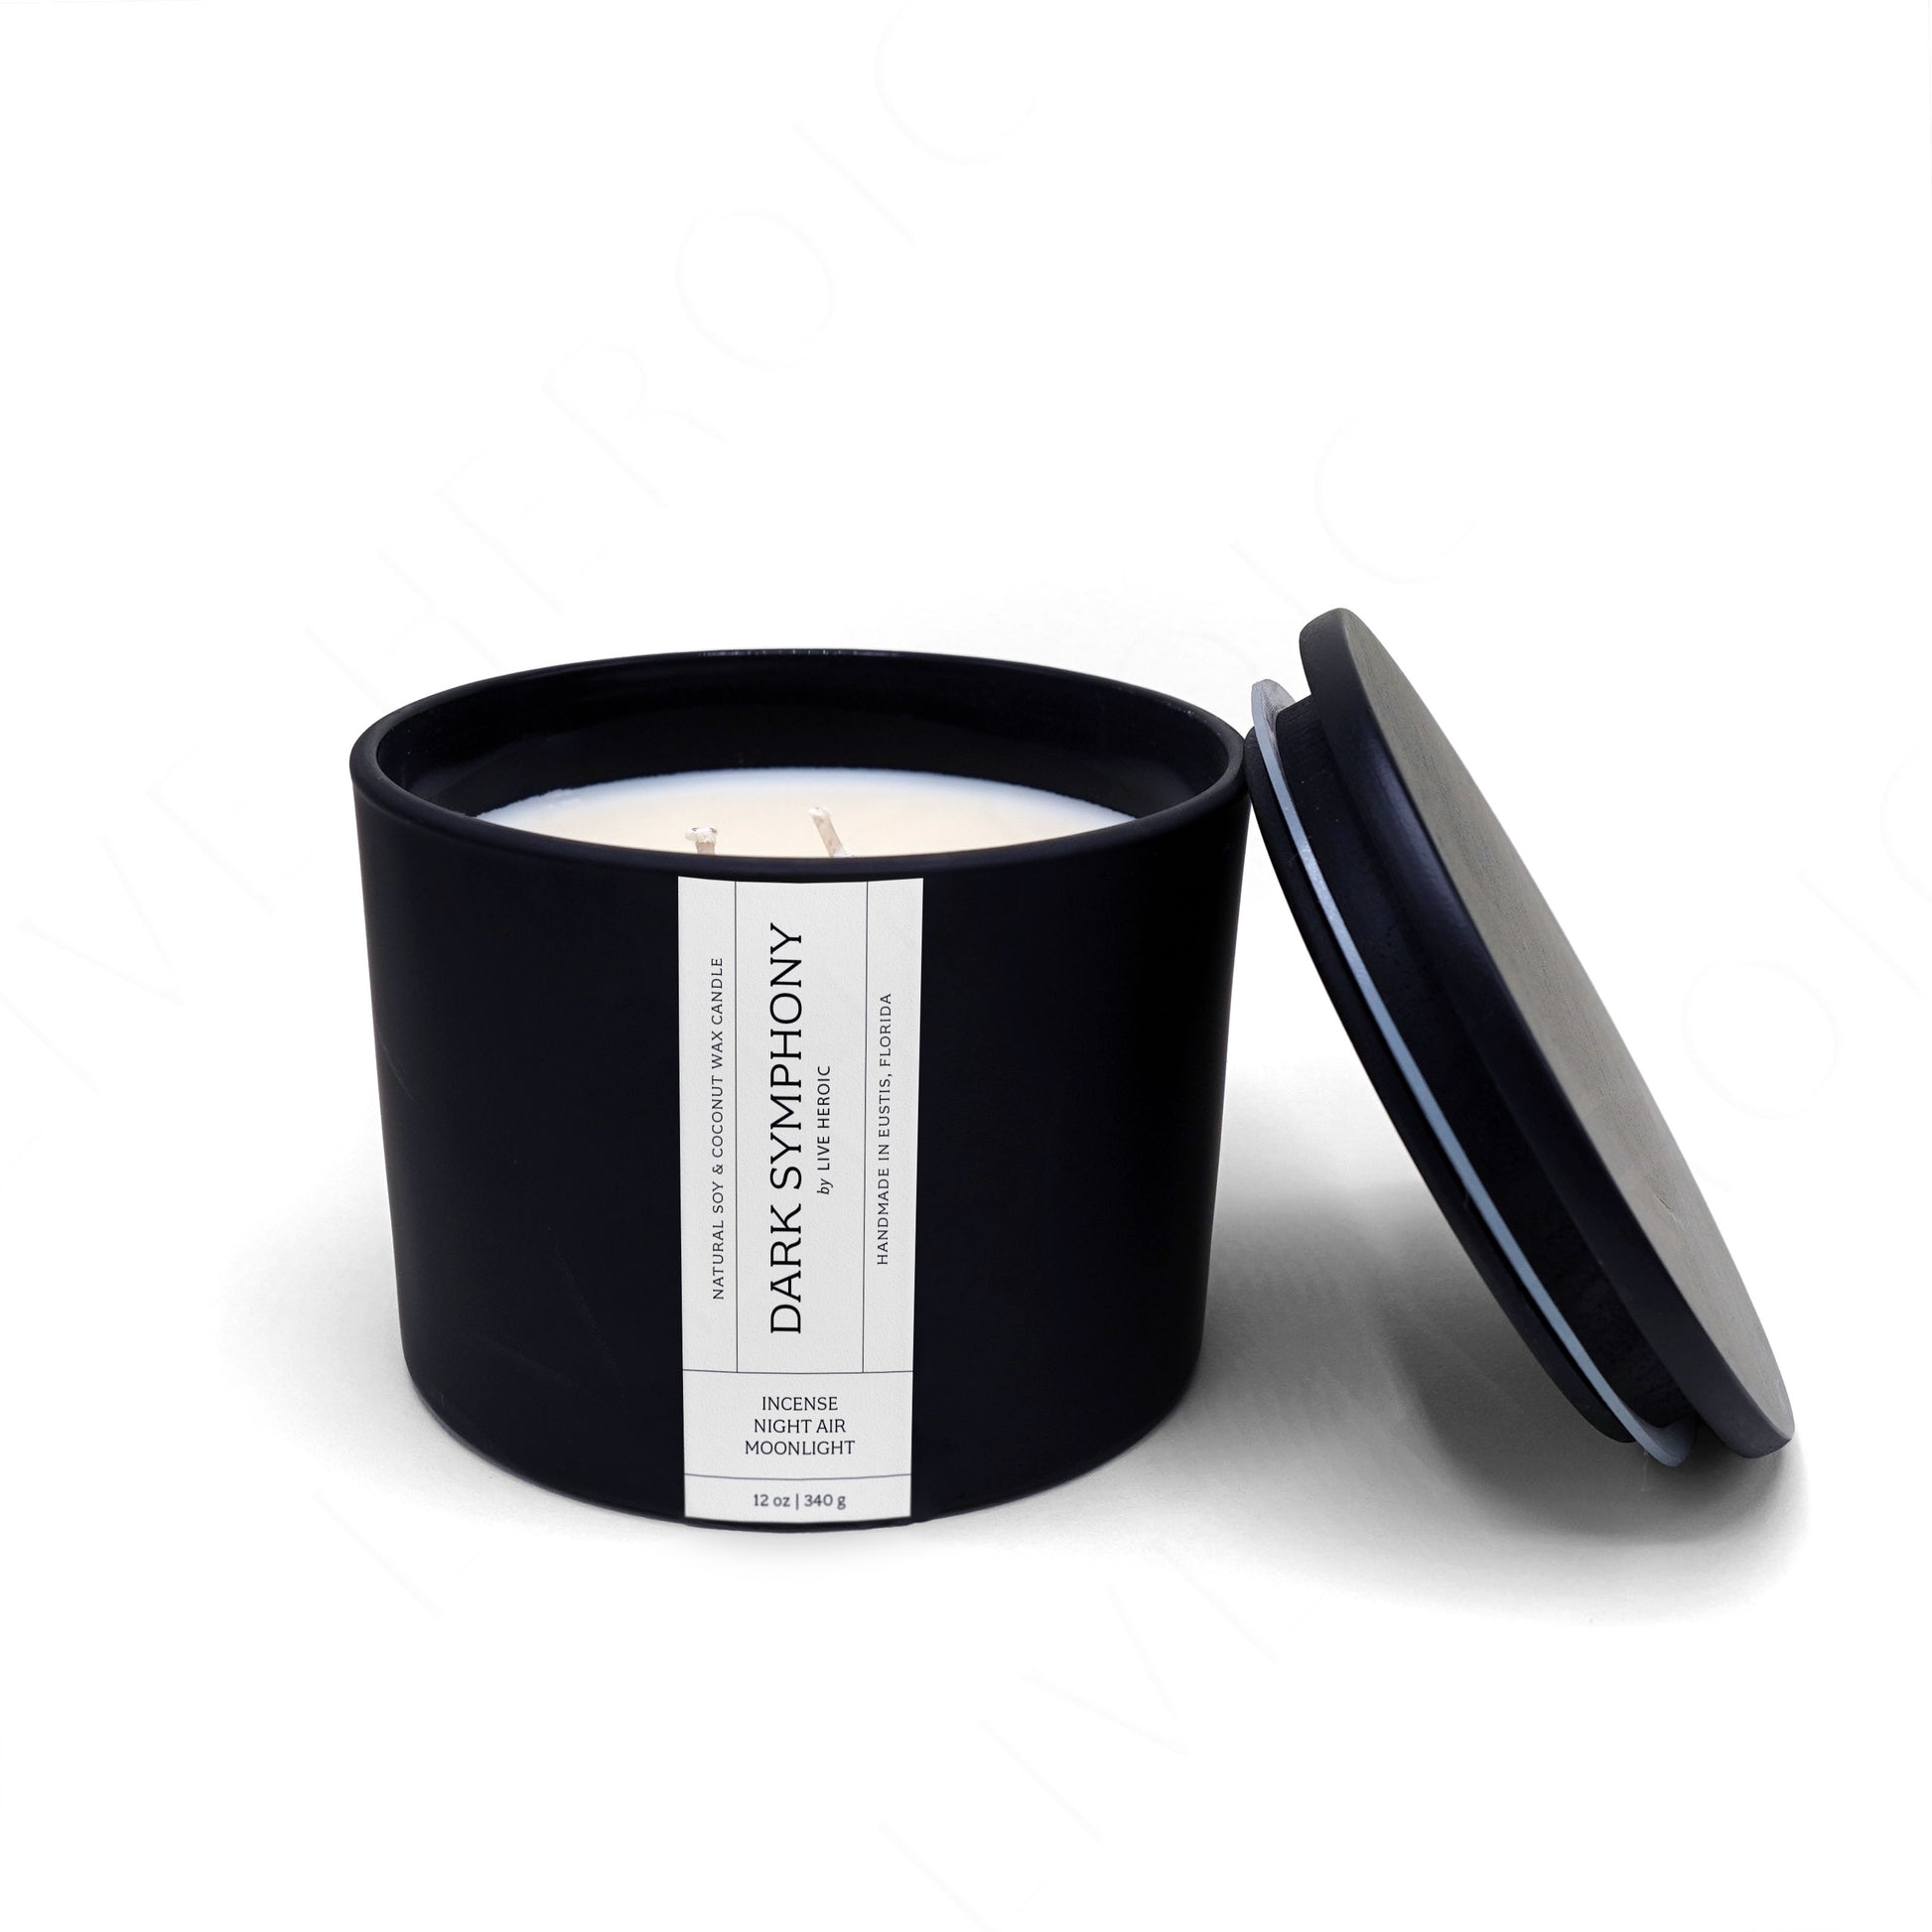 Dark Symphony | 12 oz Scented Coconut & Soy Wax Candle by Live Heroic